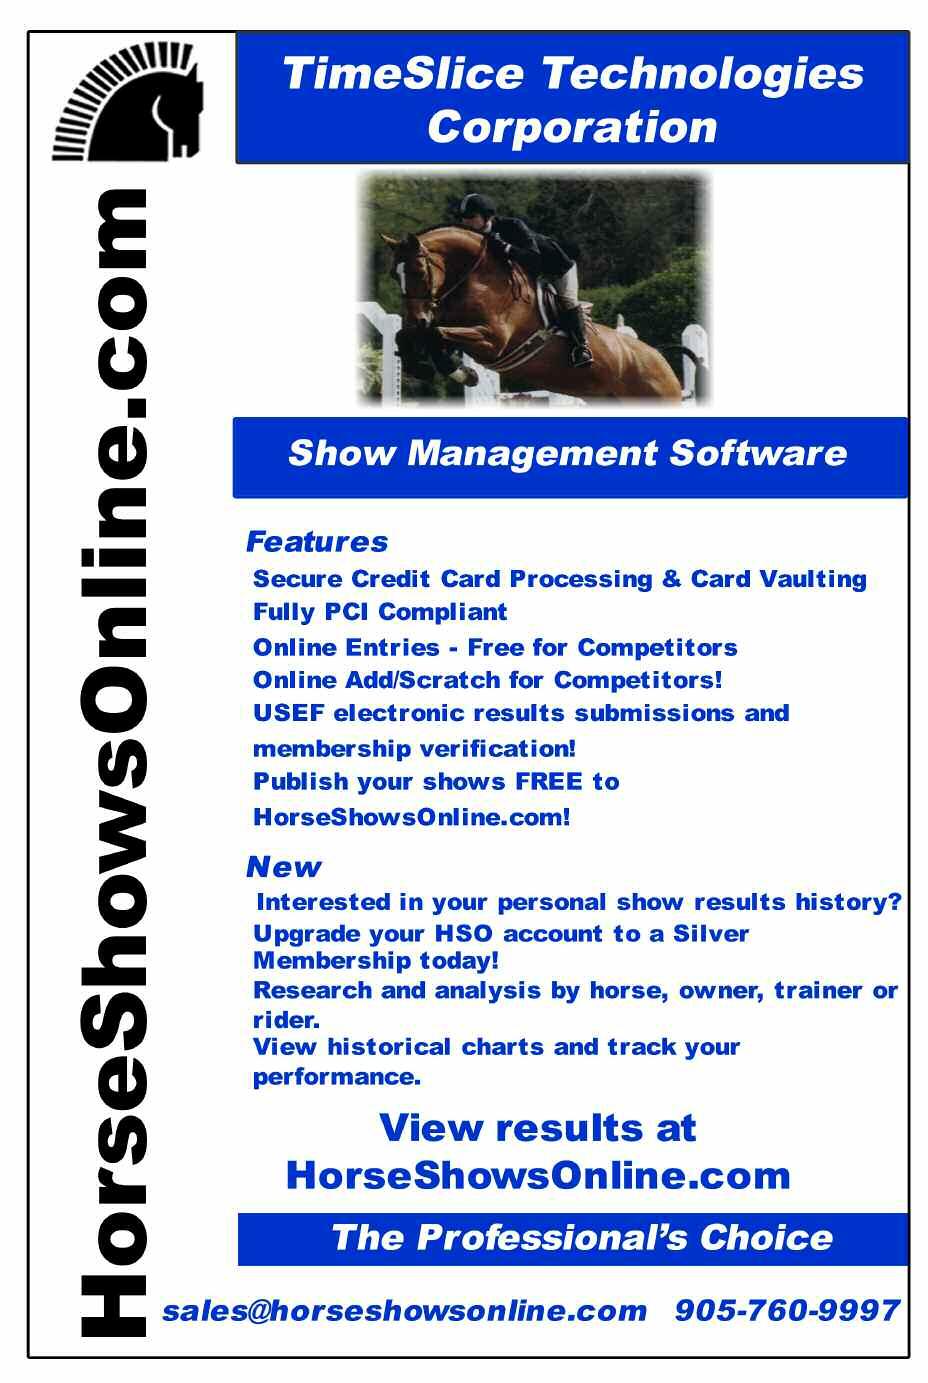 *** Horse, Owner & Rider MUST be current SCHJA Members *** For comp